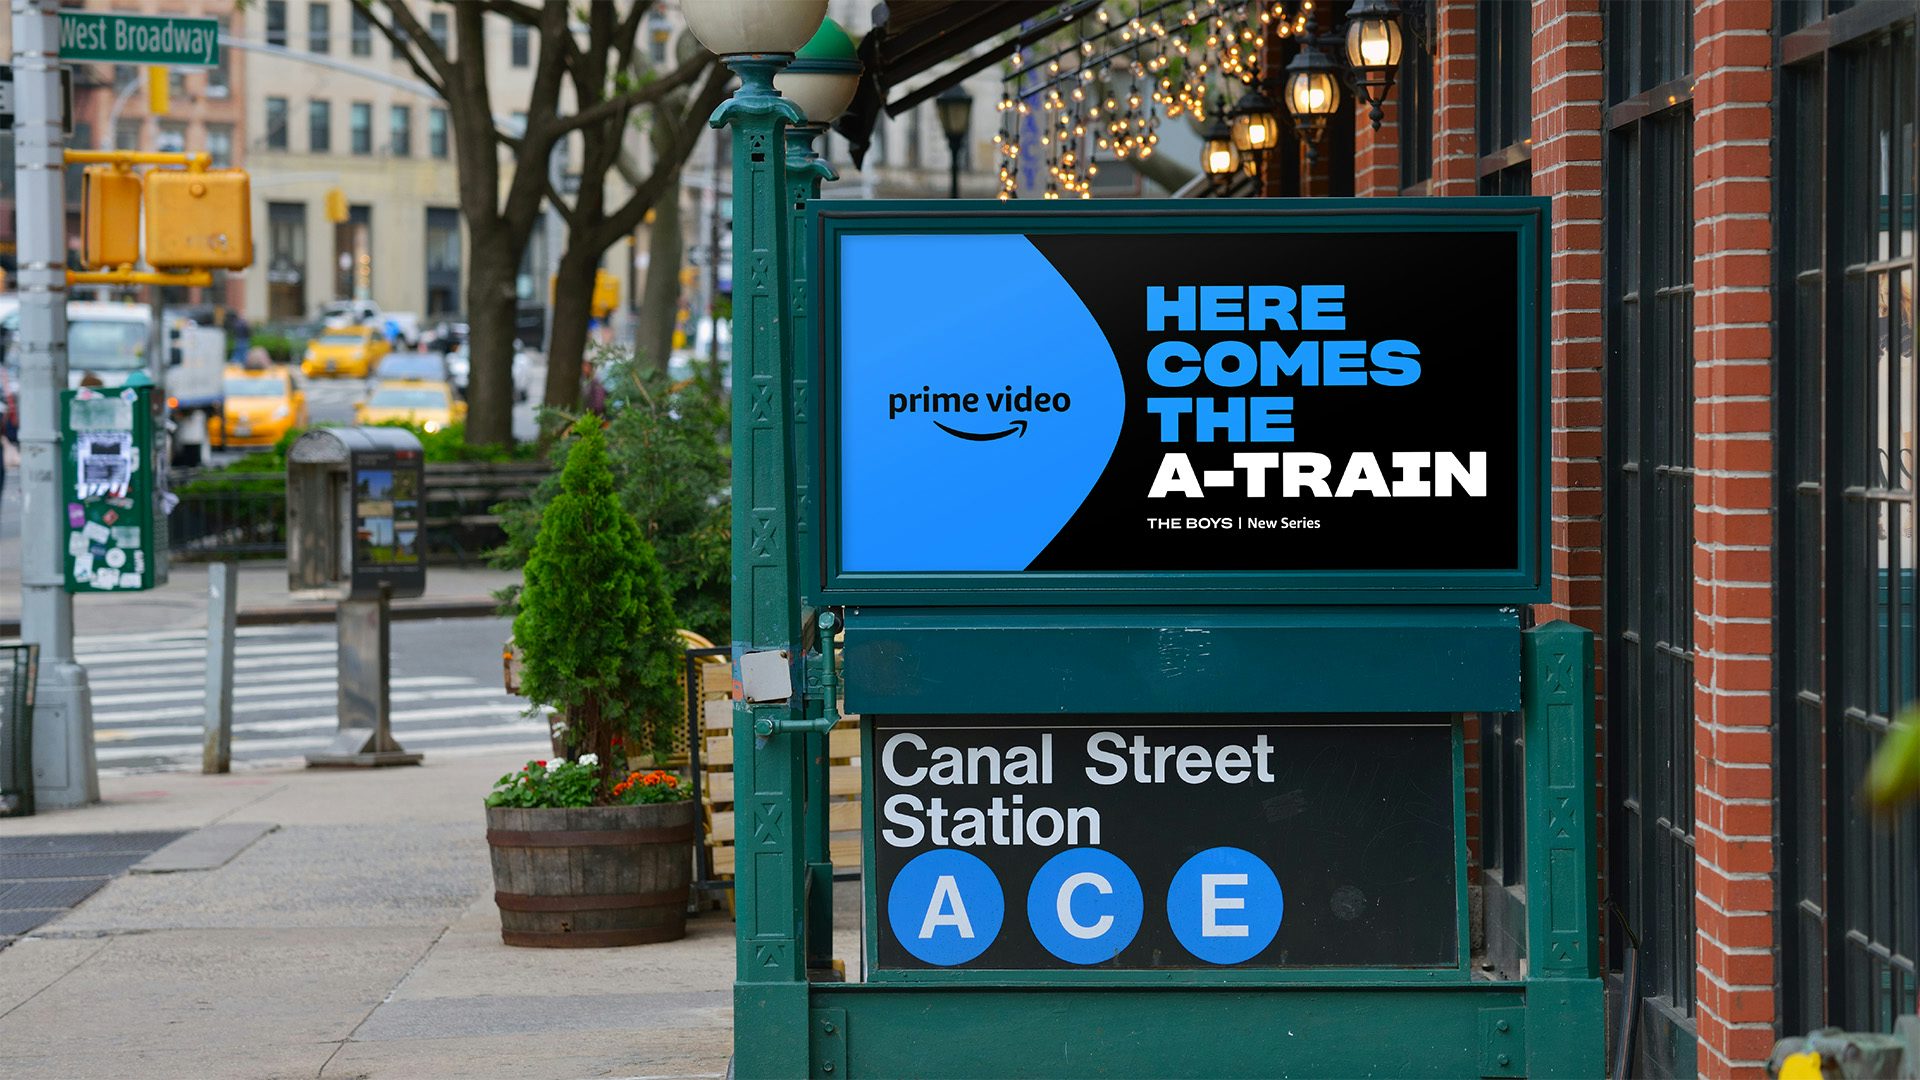 Image shows an outdoor advert featuring the new Prime Video branding. The ad reads 'Here Comes The A-Train' in blue and white text on a black background